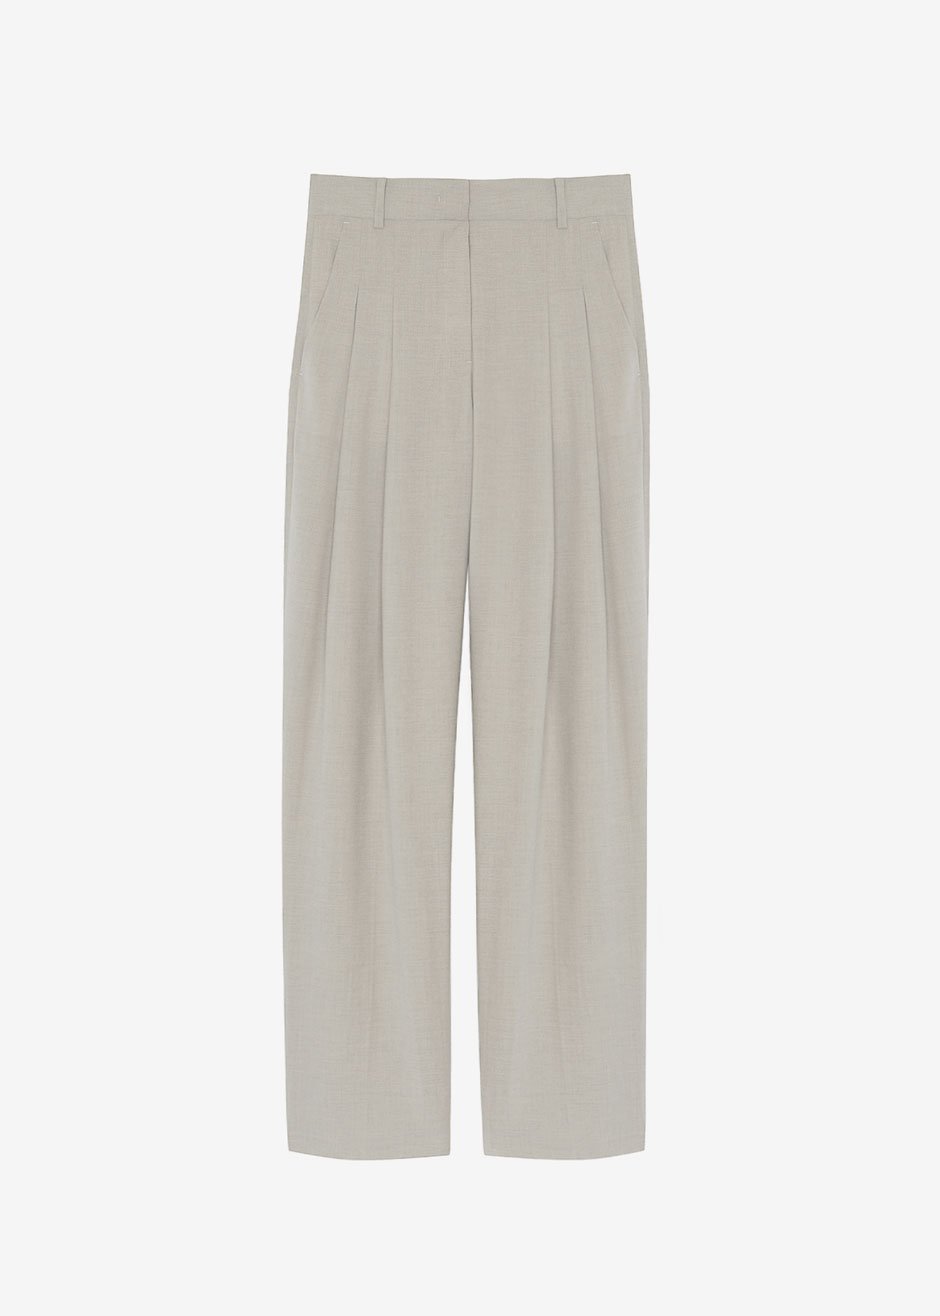 Gelso Pleated Trousers - Light Taupe Melange - 16